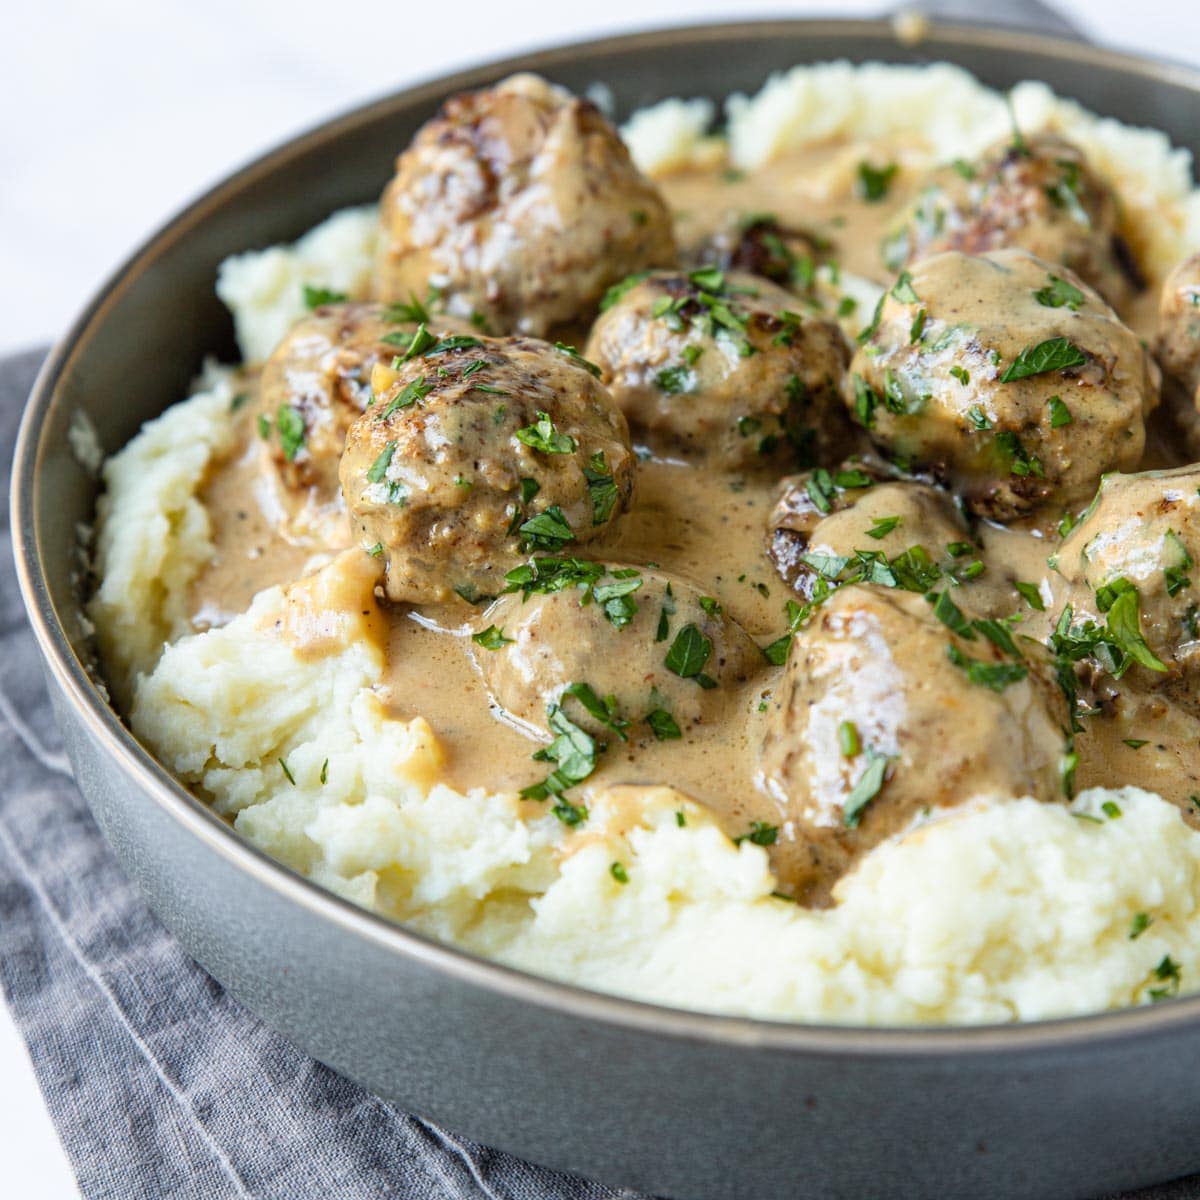 mashed potatoes and Swedish Meatballs in a gray bowl